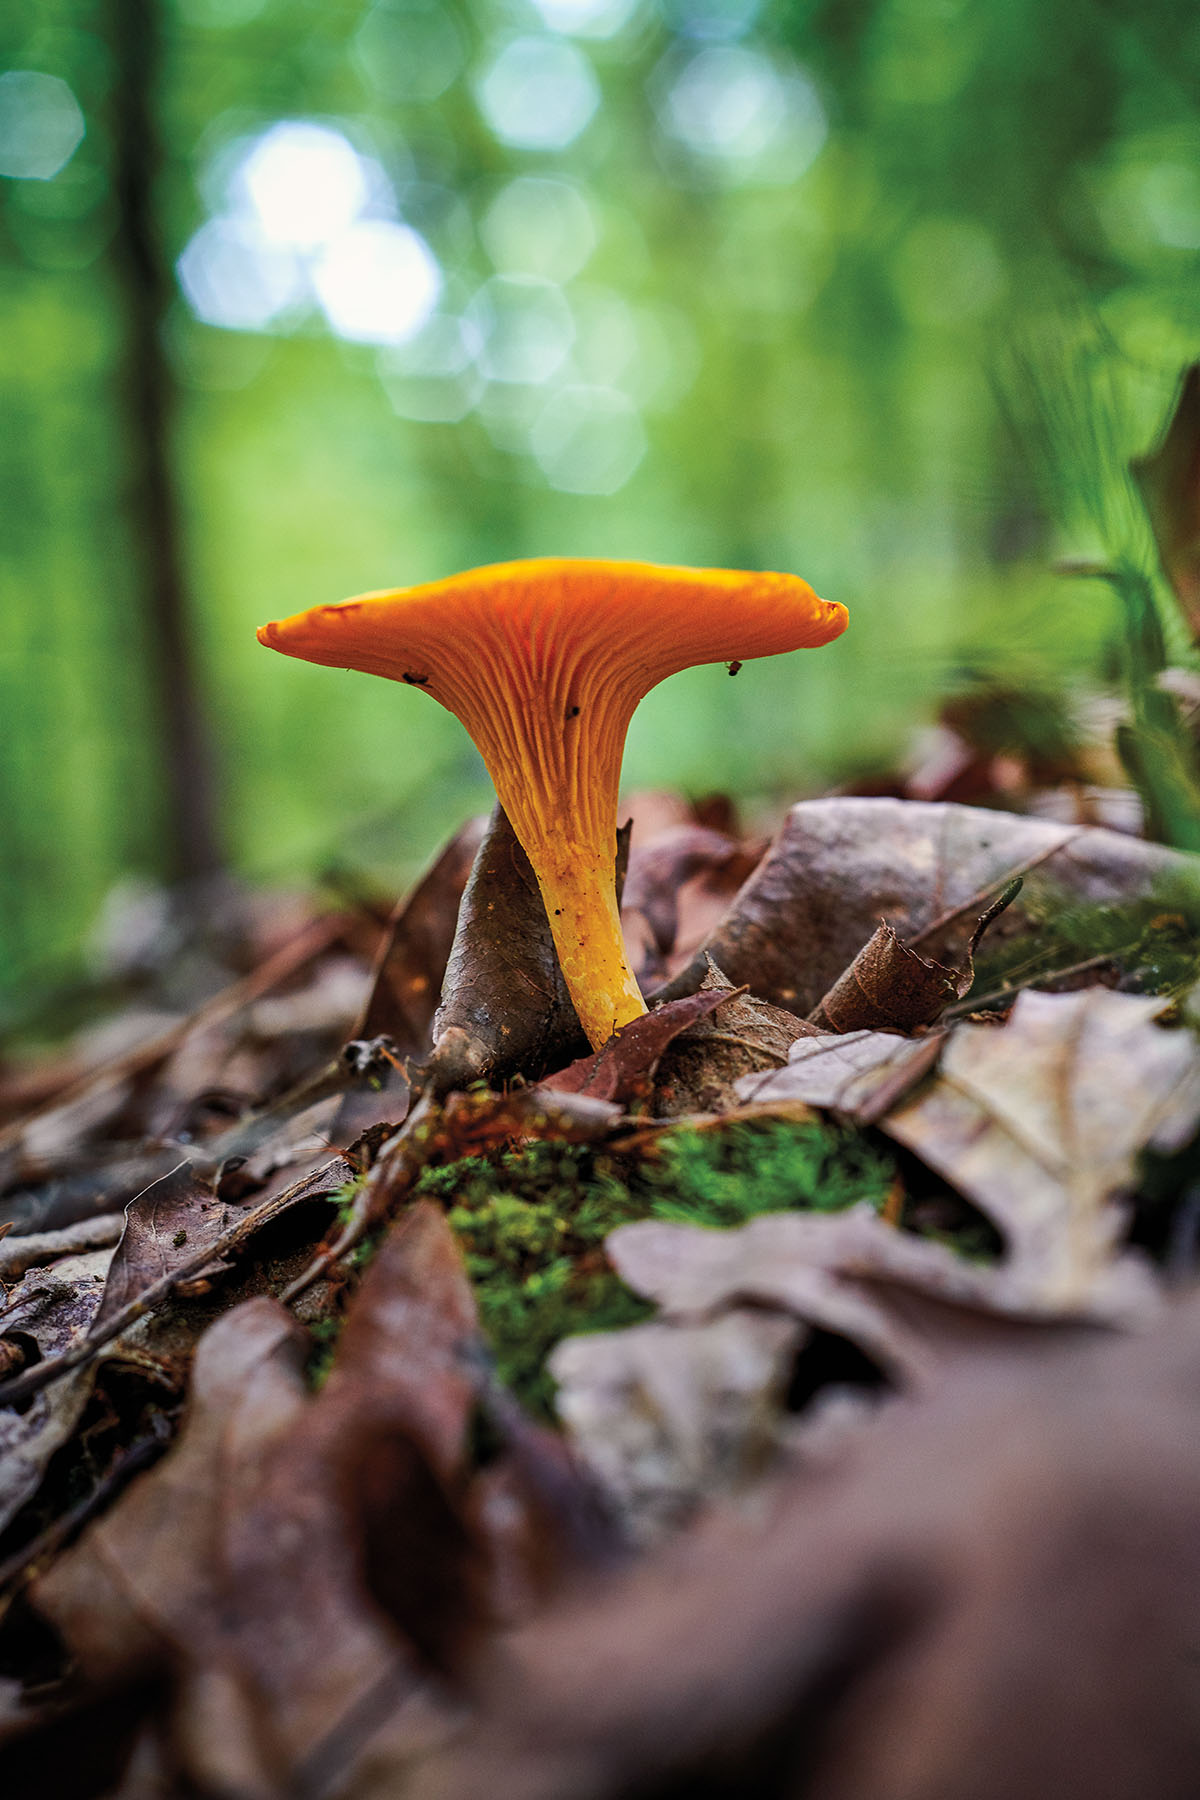 A bright orange mushroom in the center of brown leaves